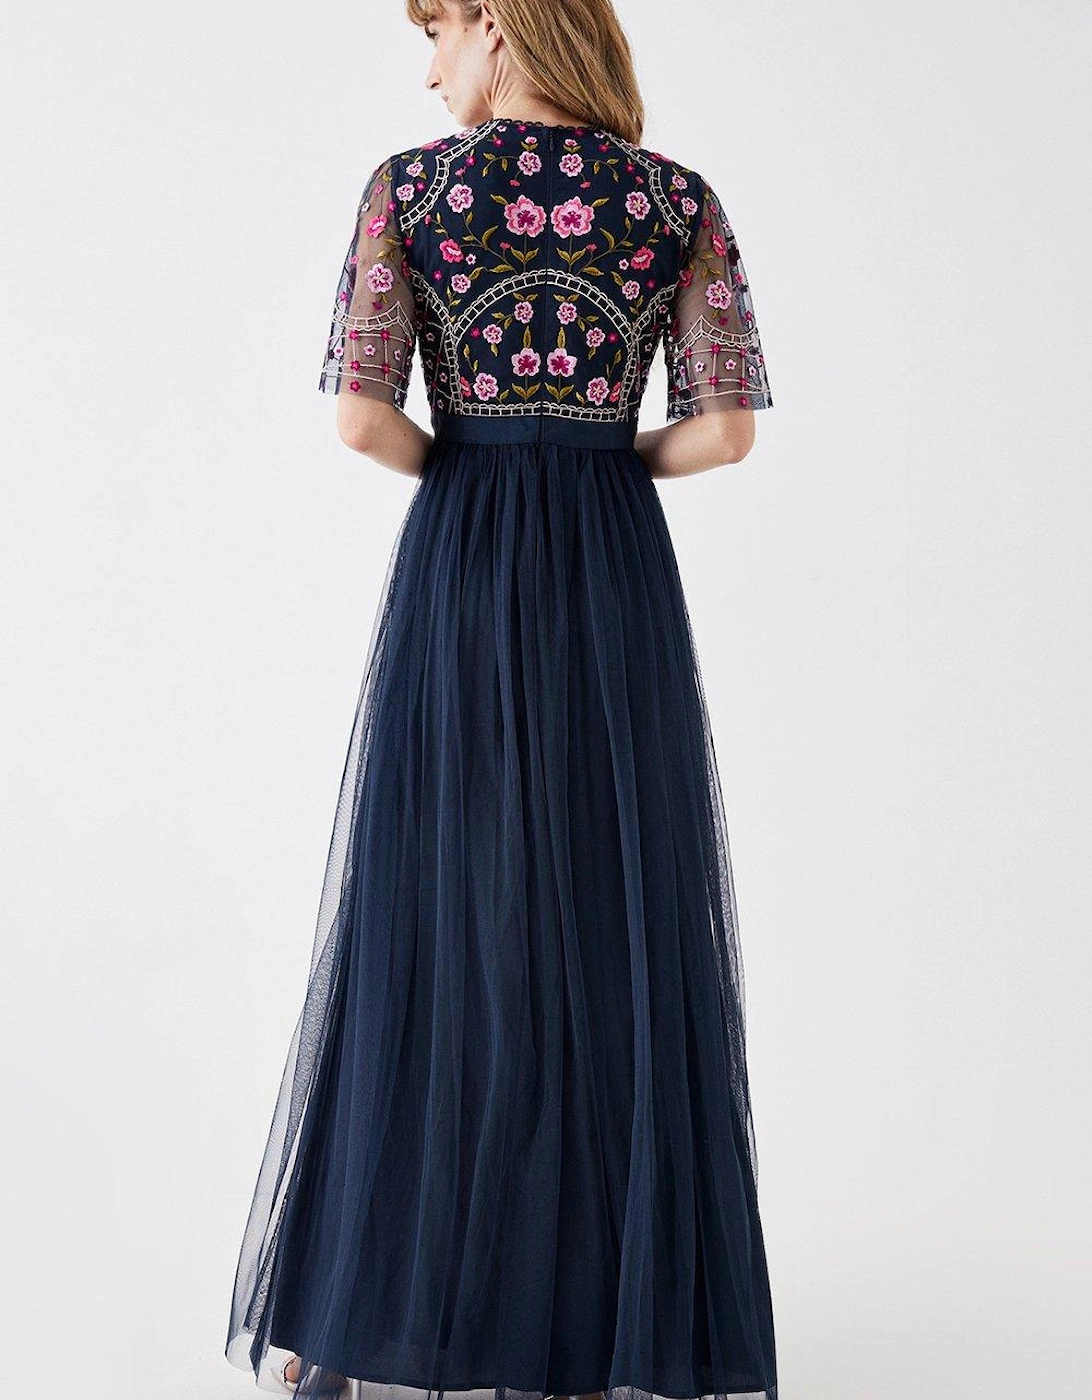 Embroidered Bodice Mesh Skirt Maxi Dress